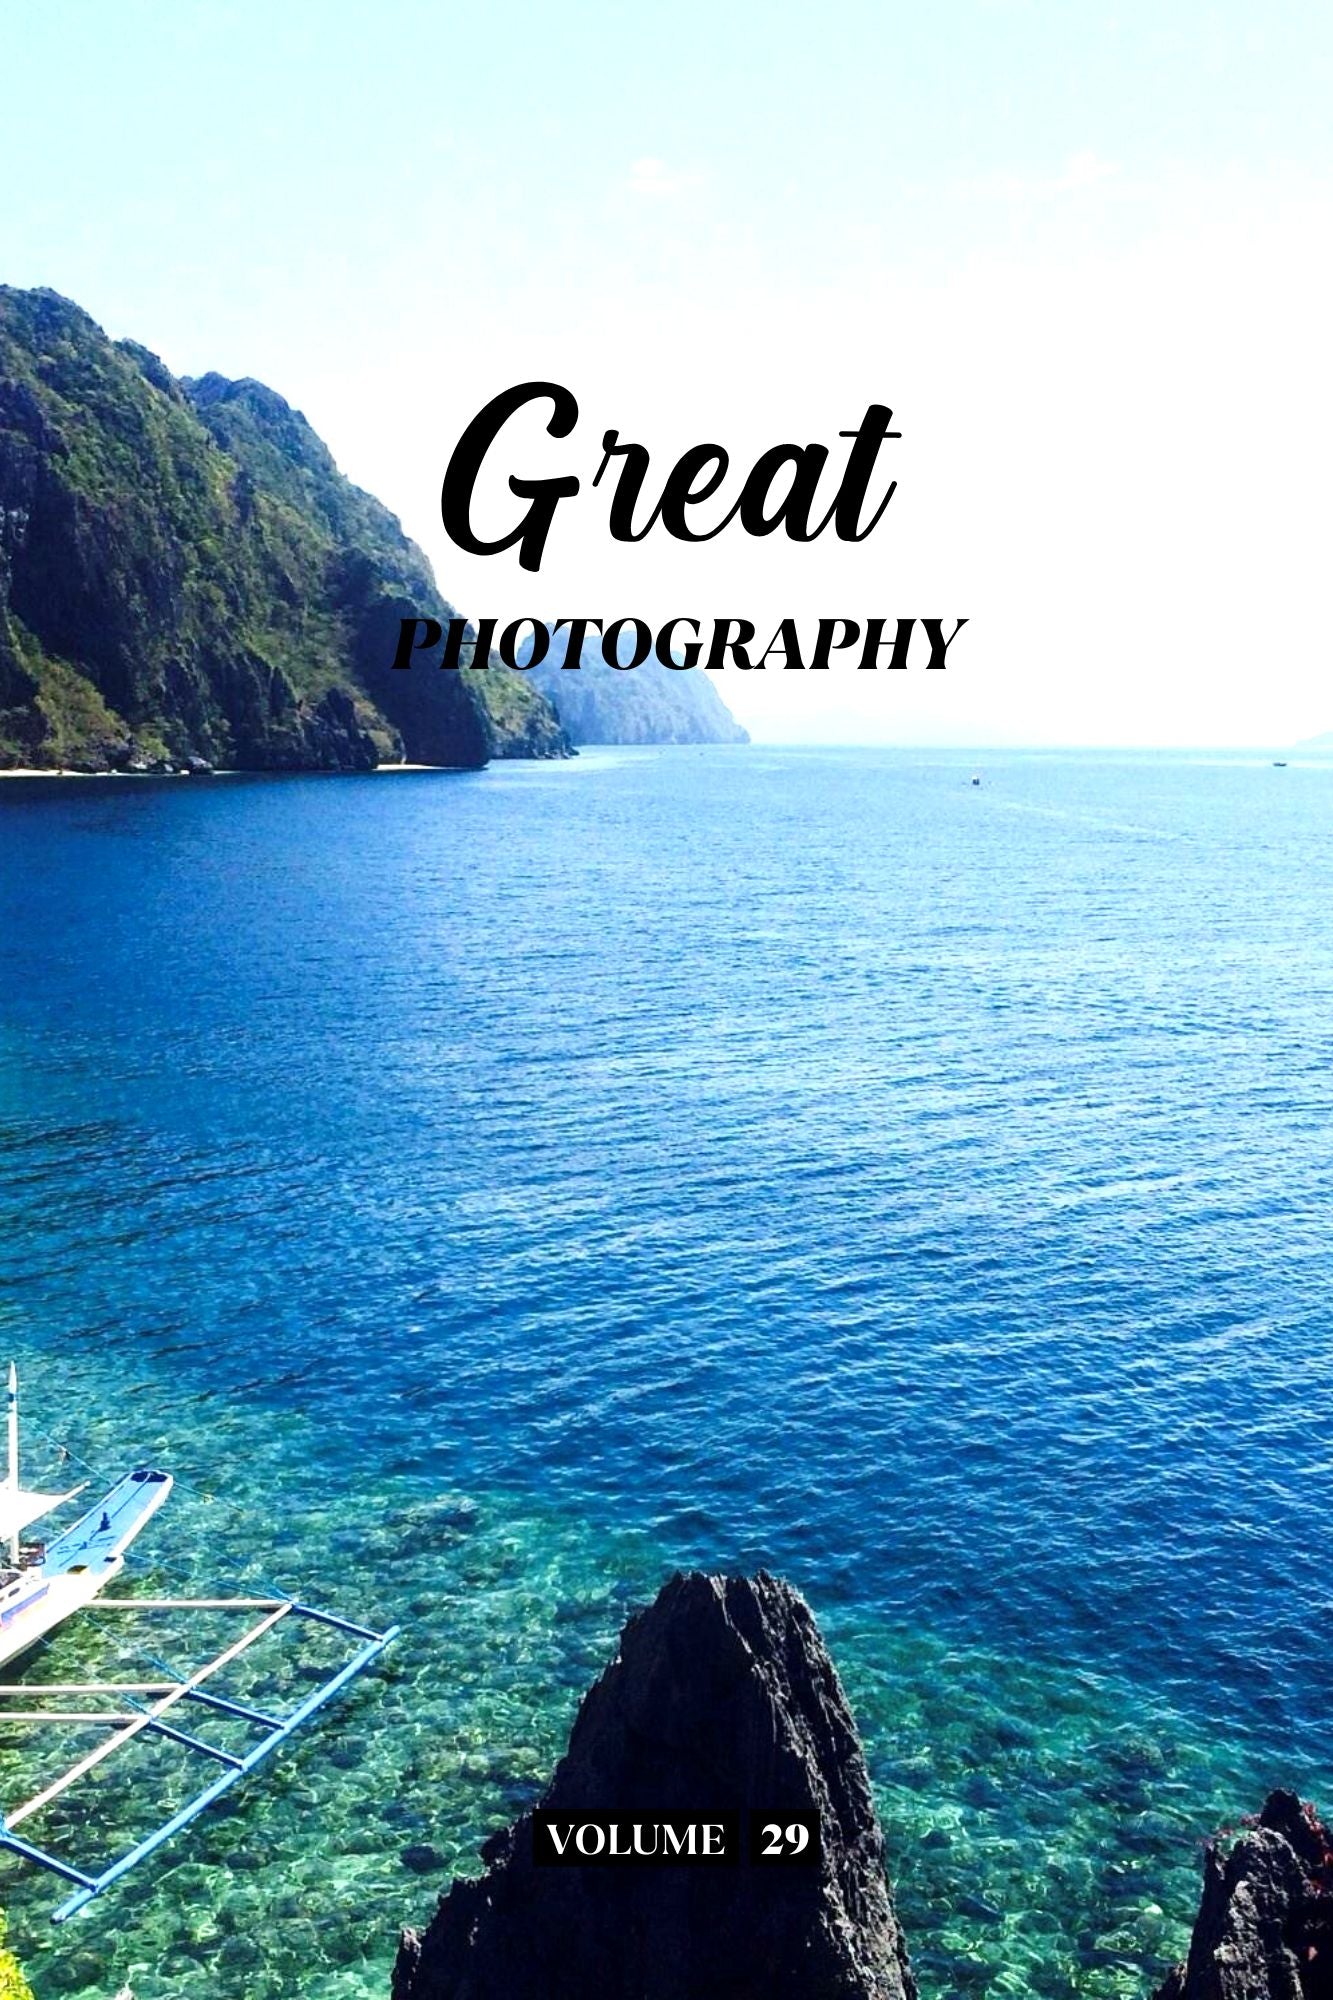 Great Photography Volume 29 (Physical Book Pre-Order)